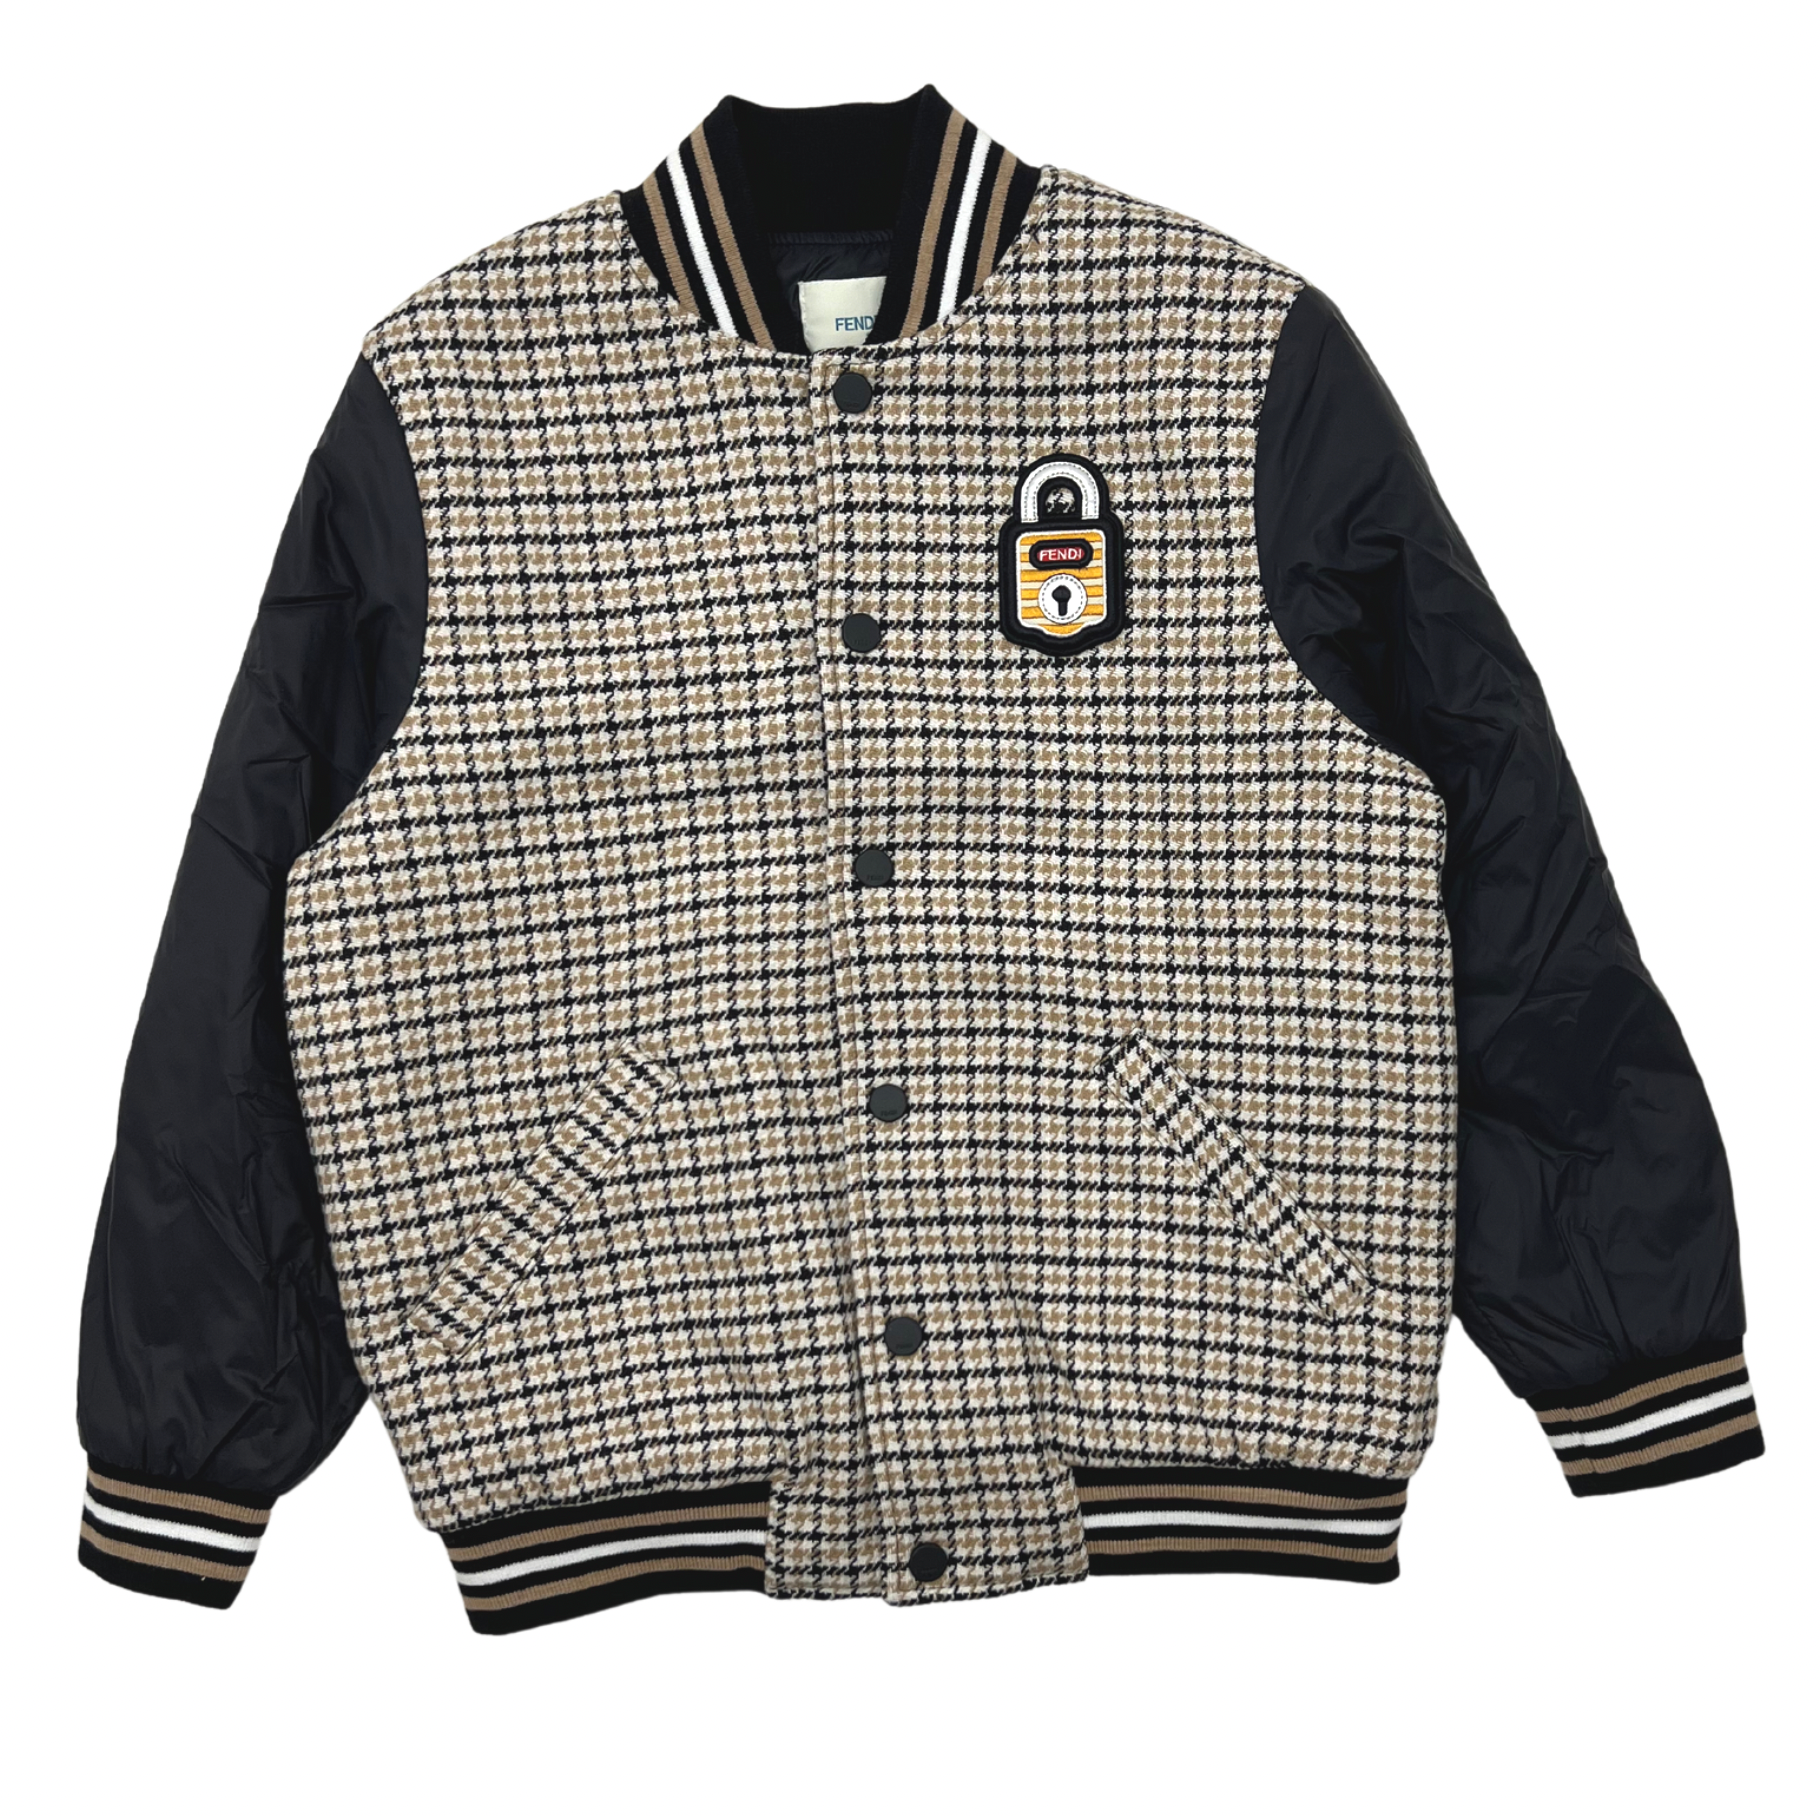 FENDI - Houndstooth jacket with padlock and logo - 8 years old